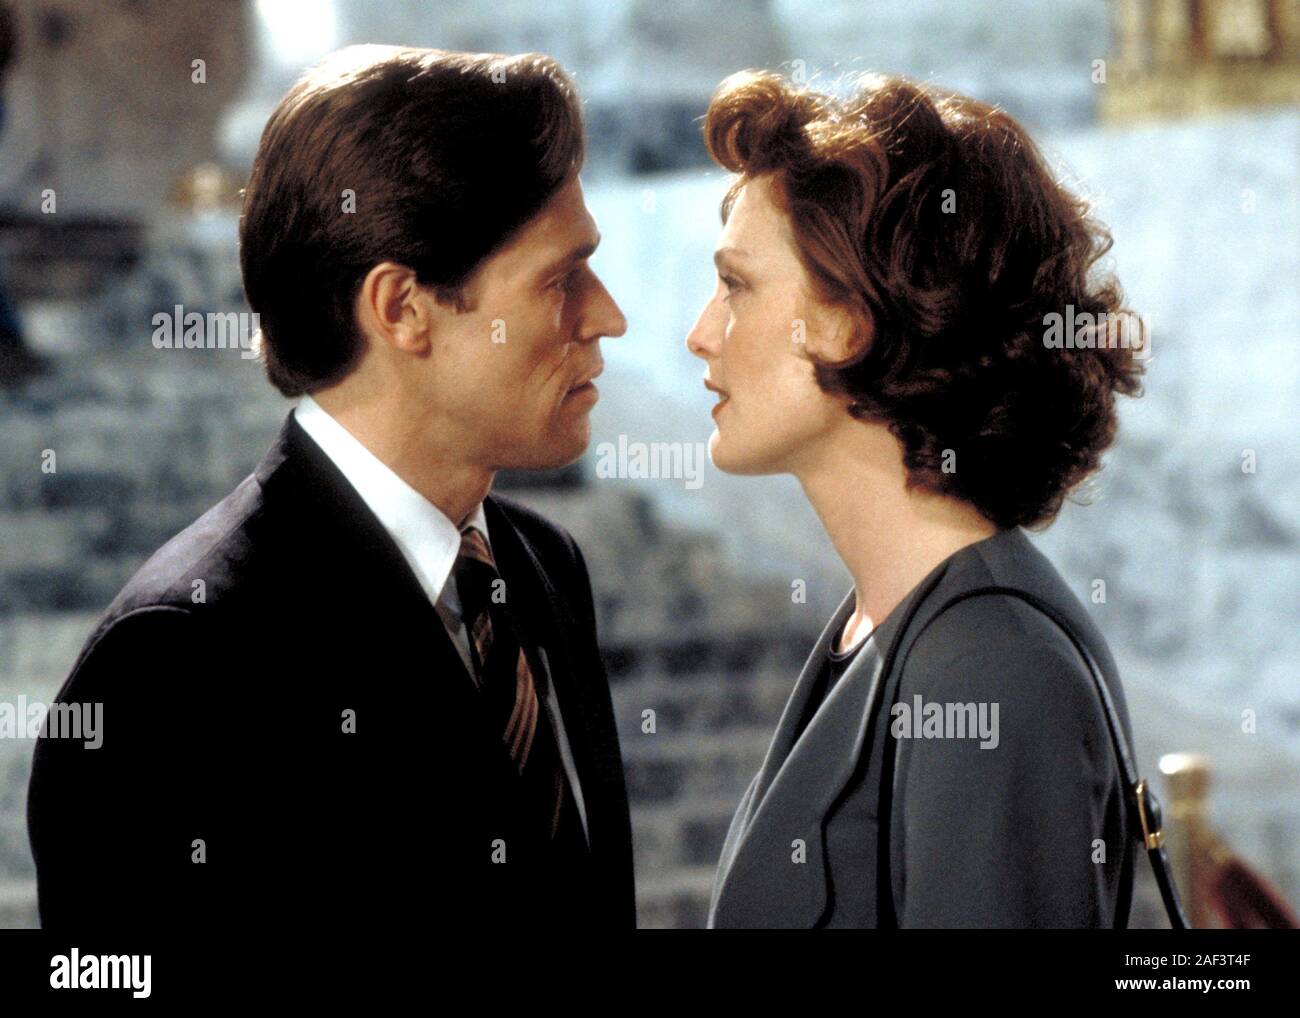 WILLEM DAFOE and JULIANNE MOORE in BODY OF EVIDENCE (1993), directed by ULI  EDEL. Copyright: Editorial use only. No merchandising or book covers. This  is a publicly distributed handout. Access rights only,